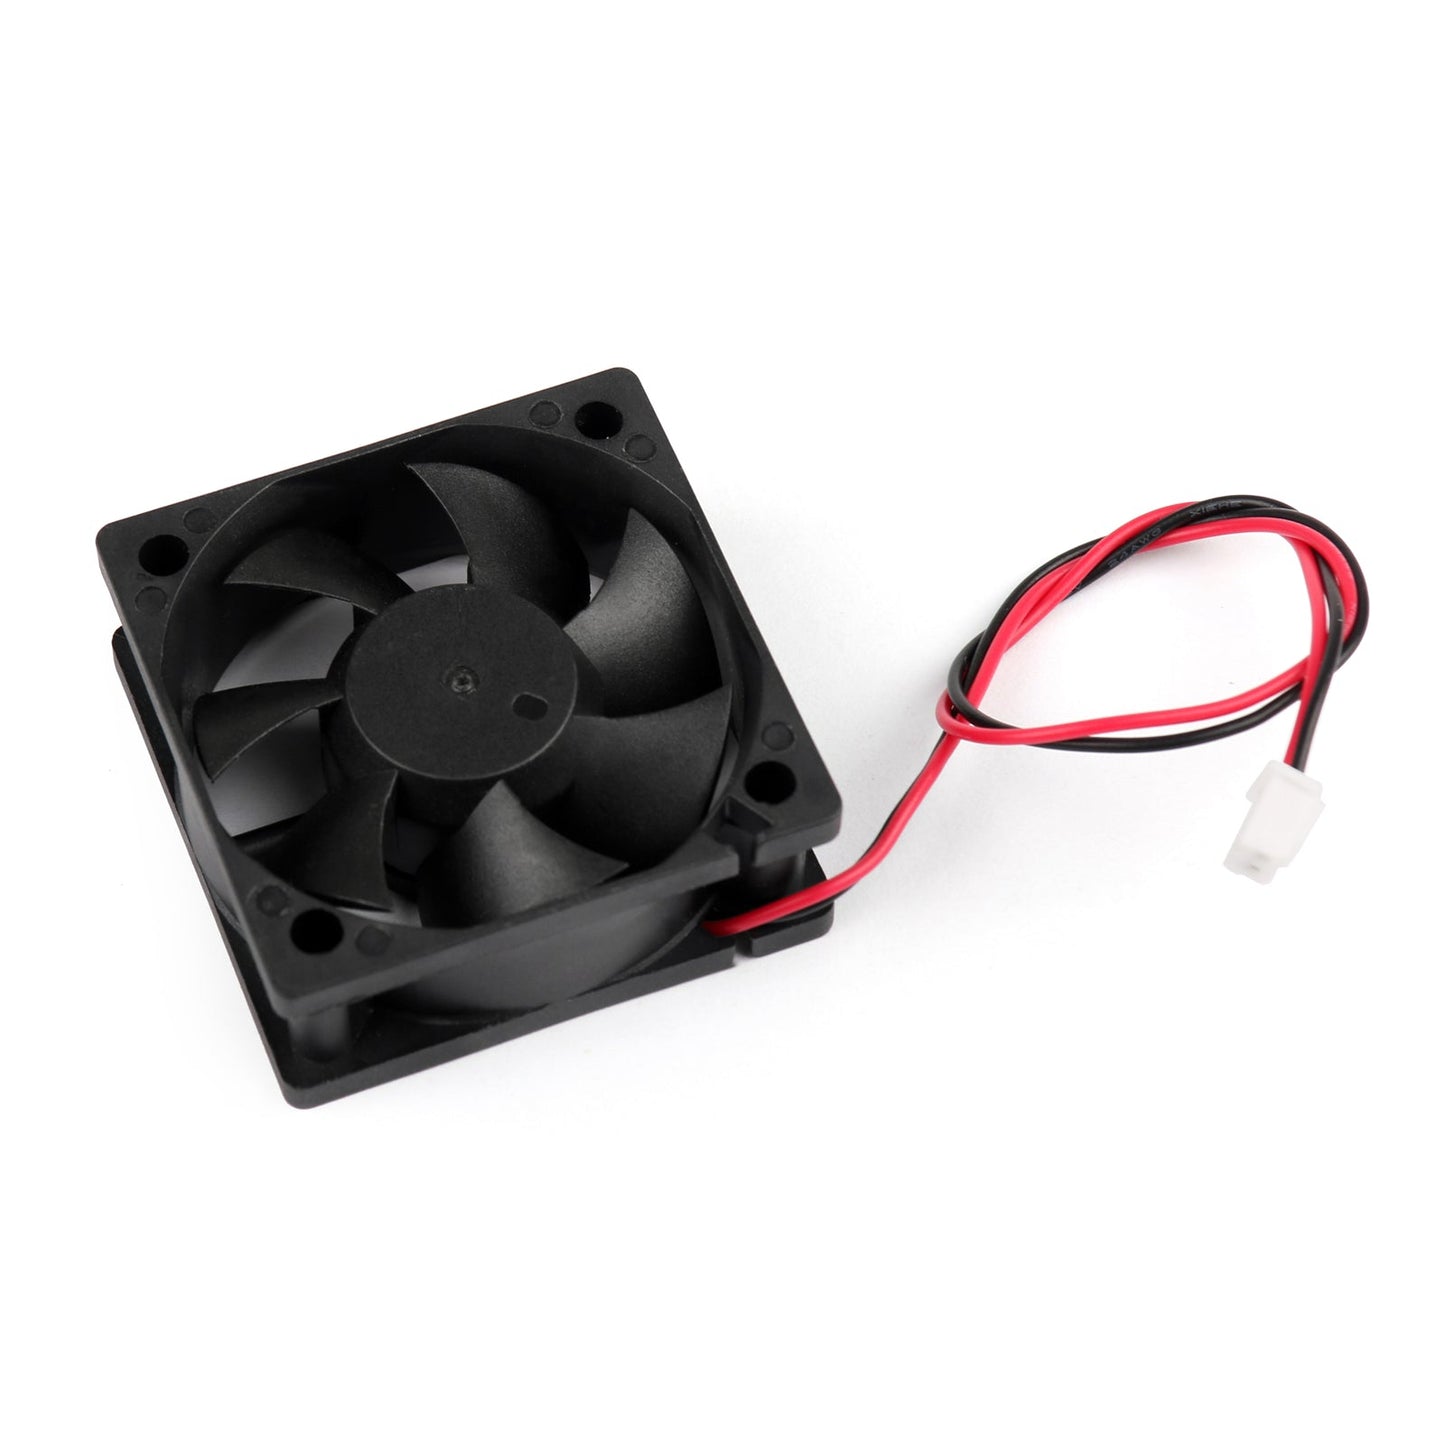 10PCS DC Brushless Cooling PC Computer Fan 24V 5020s 50x50x20mm 2 Pin Wire